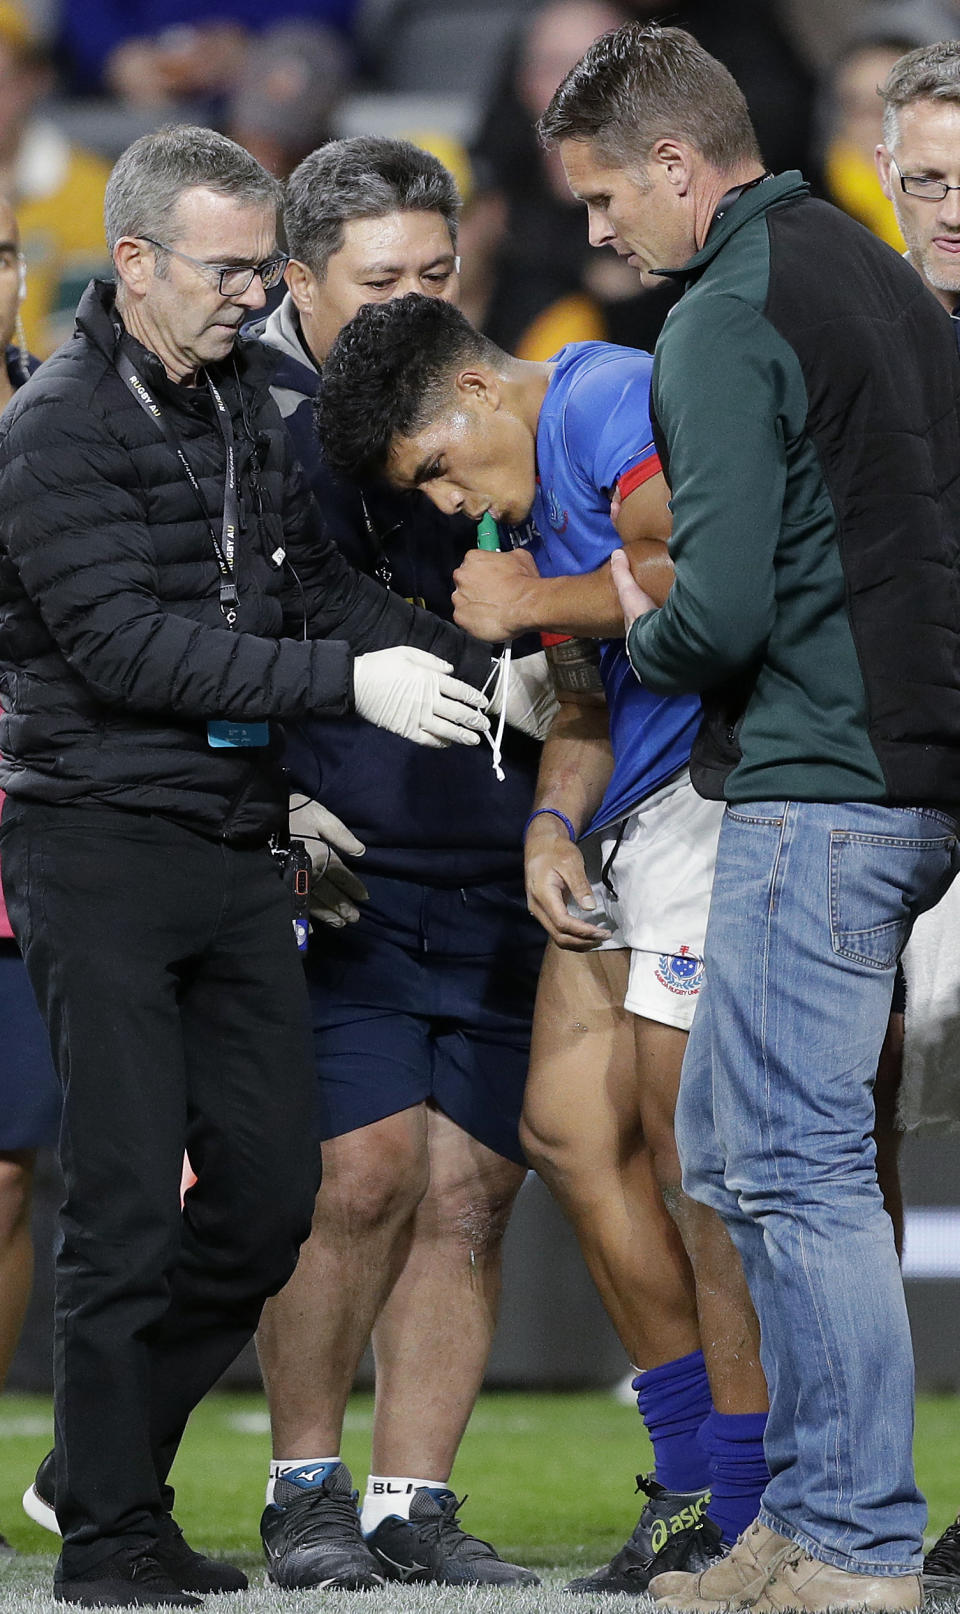 Samoa's Scott Malolua, center, is assisted off the field after an injury during their rugby union test match against Australia in Sydney, Saturday, Sept. 7, 2019. (AP Photo/Rick Rycroft)